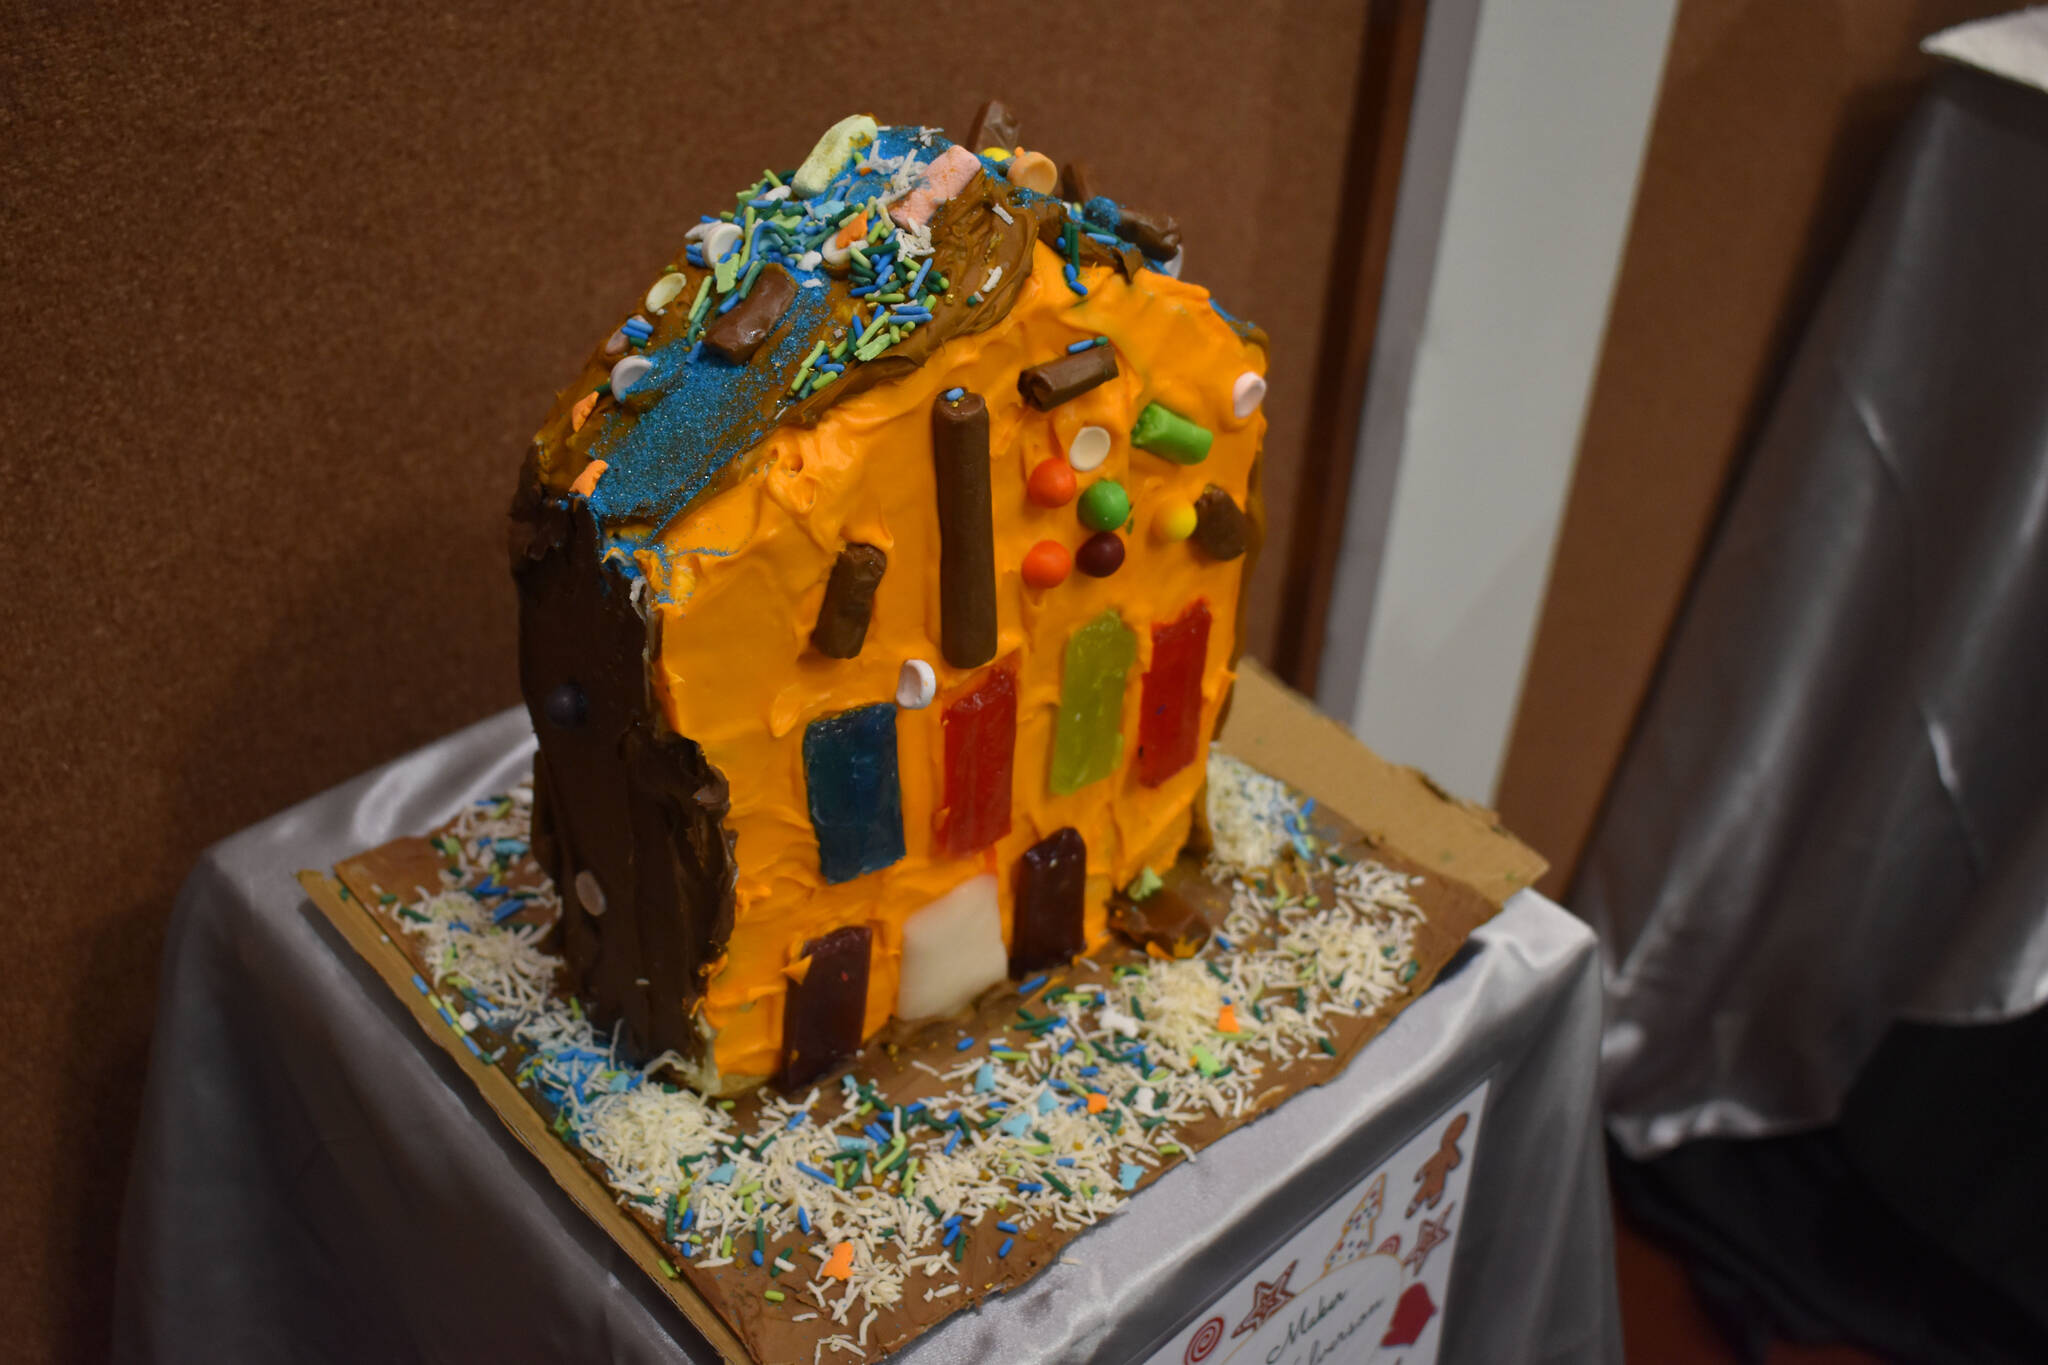 A gingerbread house designed by Hogarth Halverson is displayed at the Kenai Chamber of Commerce and Visitor Center on Tuesday, Dec. 6, 2022. (Jake Dye/Peninsula Clarion)